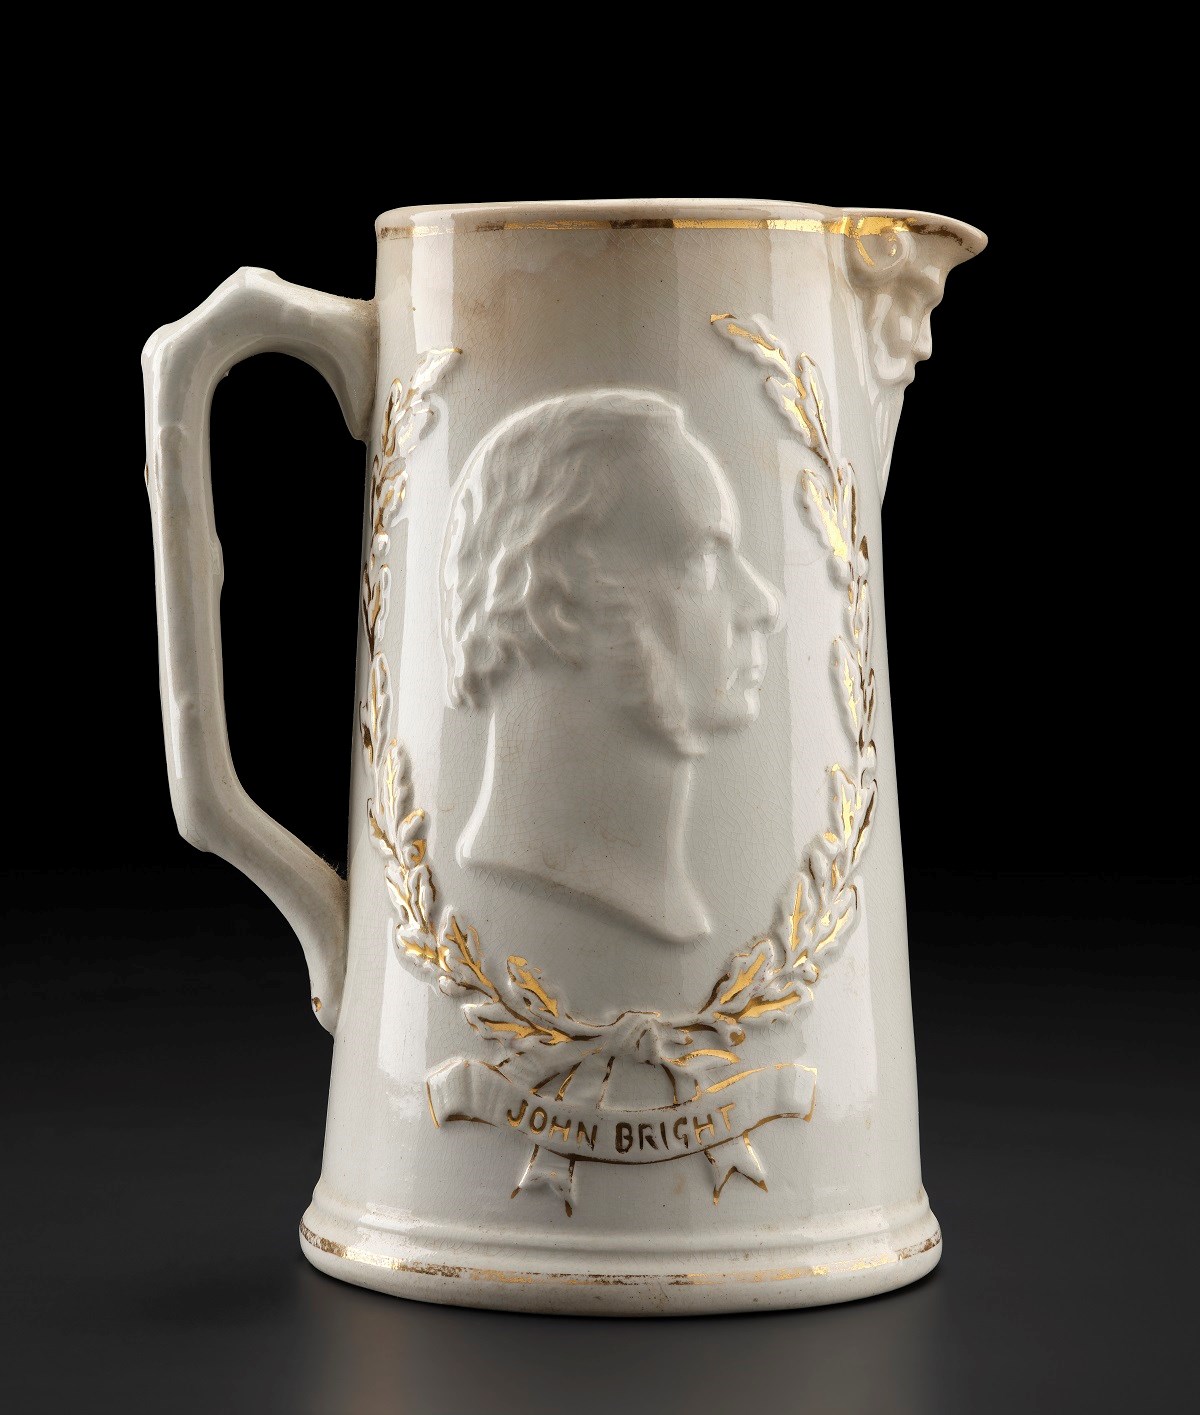 Tall white jug with thin handle on the left side and small spout facing right. Decorated with bust of a man facing right with bushy facial hair.